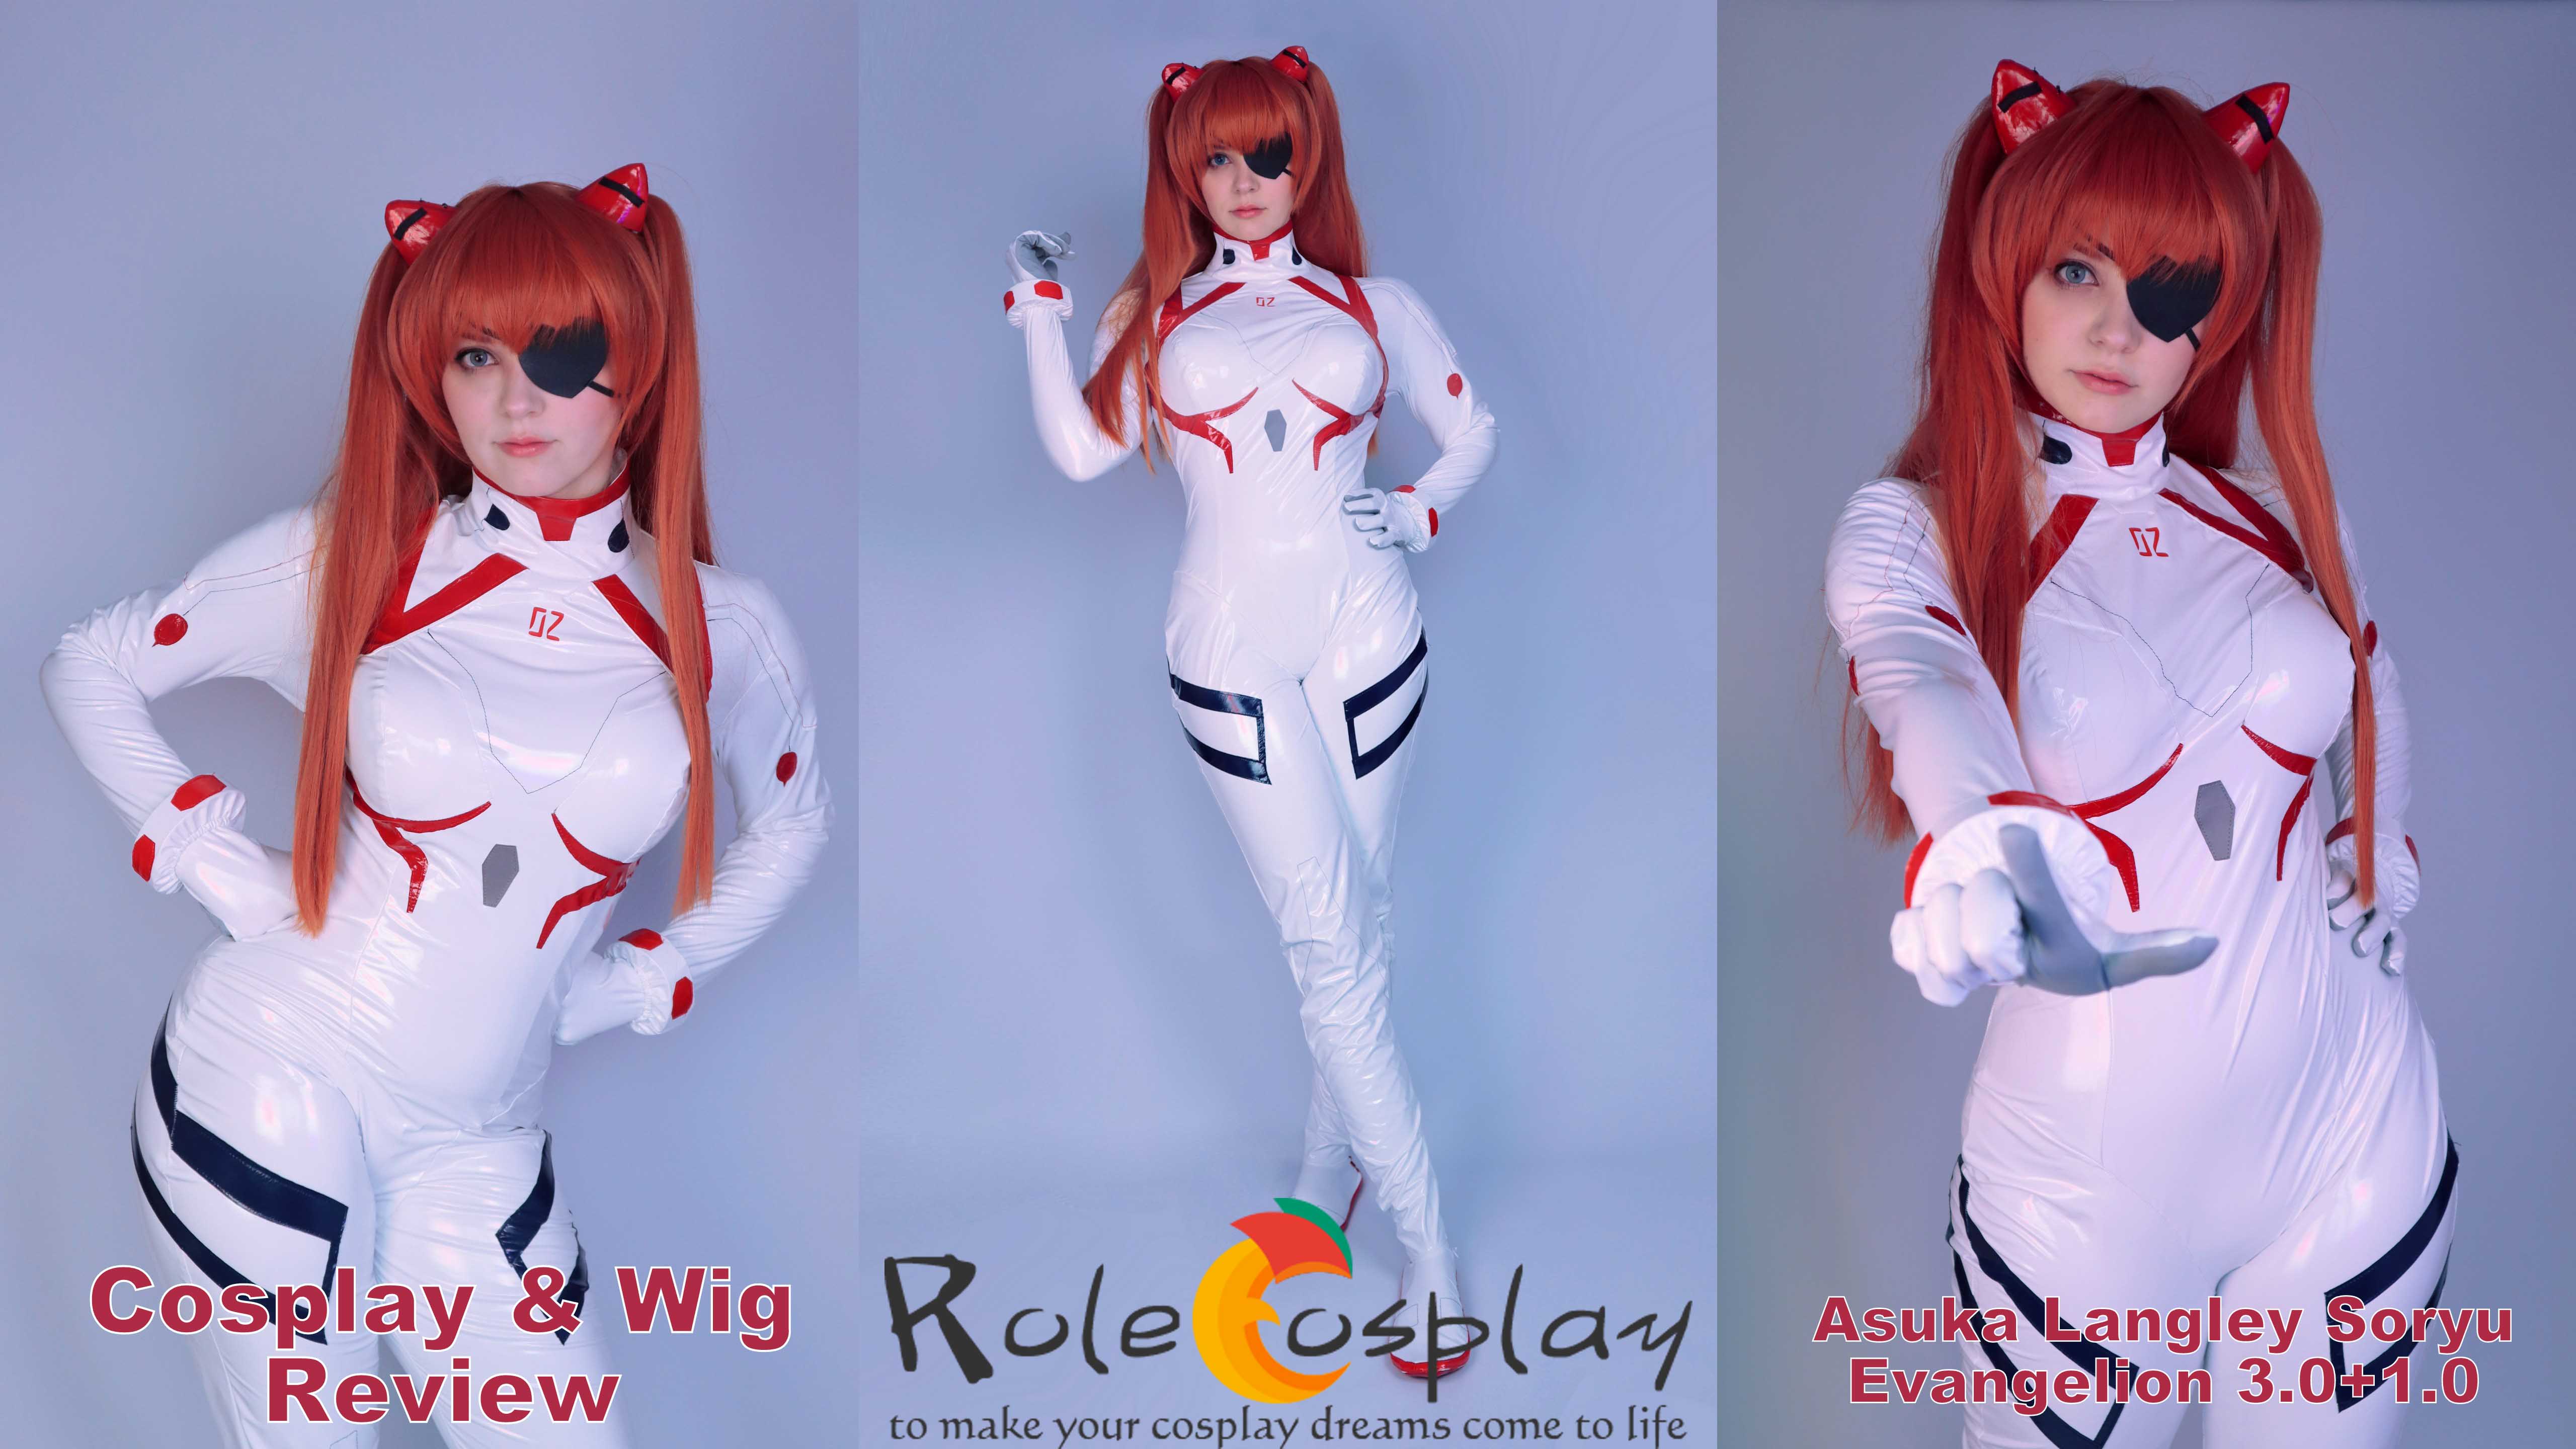 Cosplay & Wig review: Asuka Langley Soryu (Evangelion 3.0+1.0) from Rolecosplay